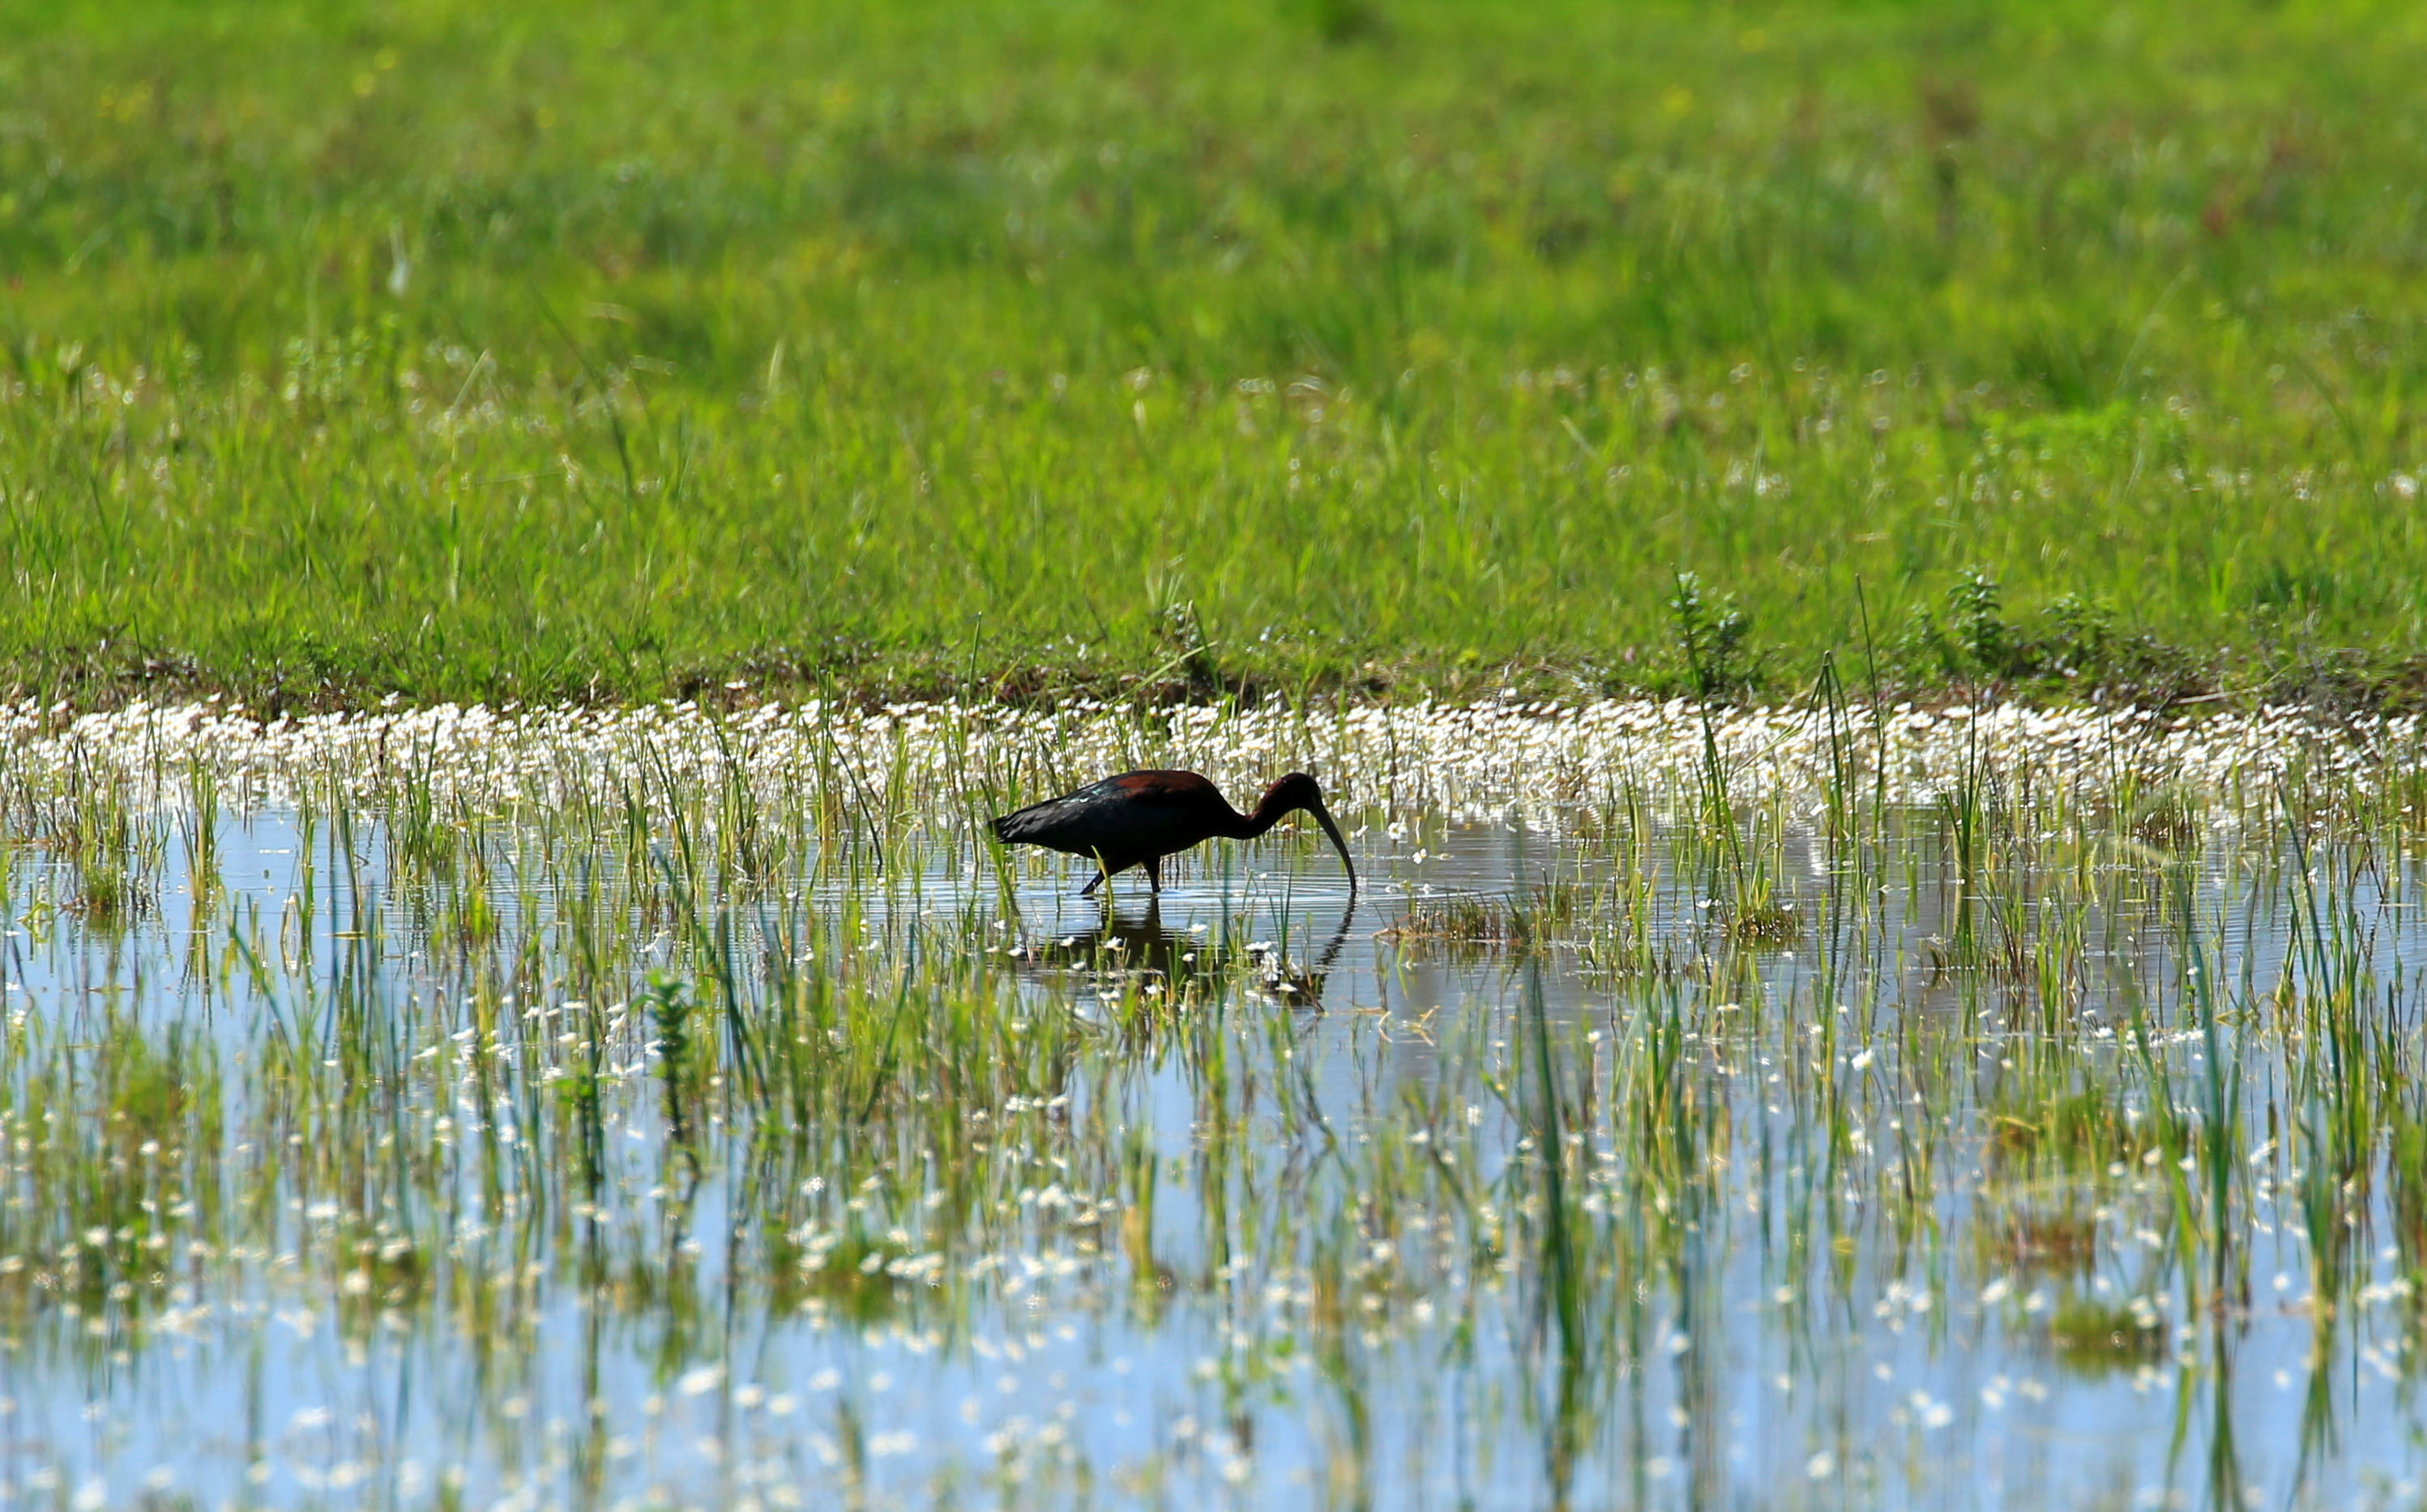 A Glossy ibis is pictured in Ammiq Wetland